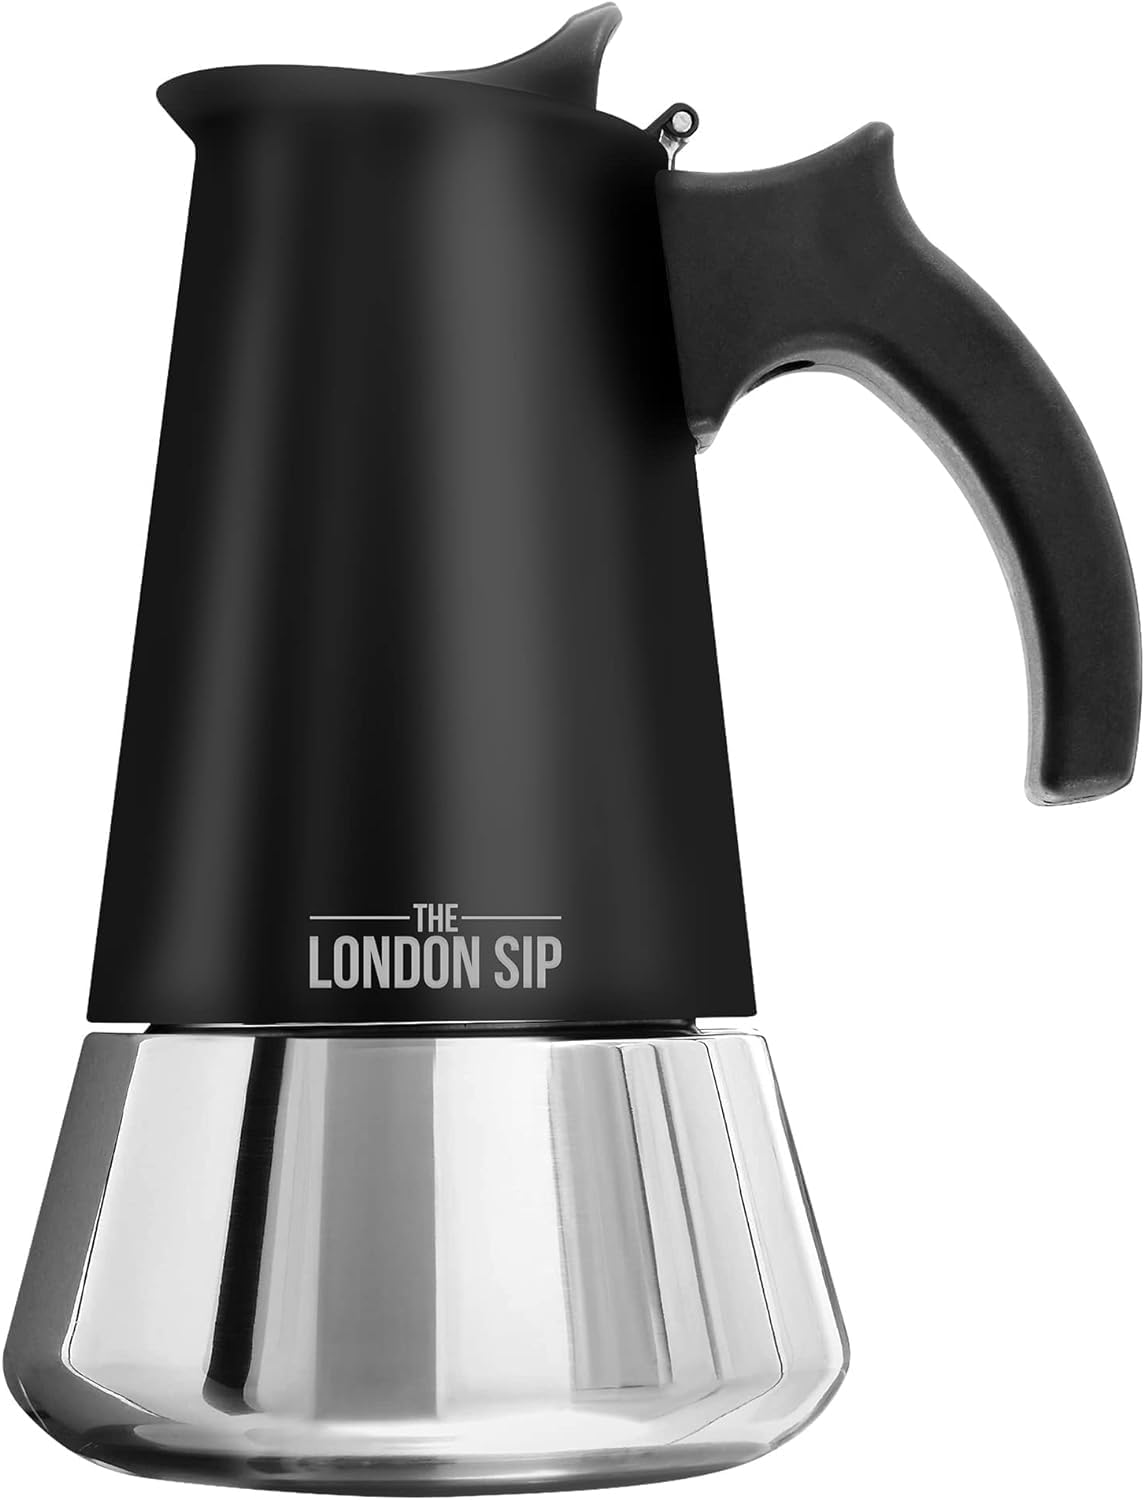 The London Sip Espresso Maker Suitable for Induction Cookers, Mocha Pot Made of Stainless Steel, Espresso Jug 6 Cups (300 ml), Mocha Pot Suitable for All Types of Cookers, Black